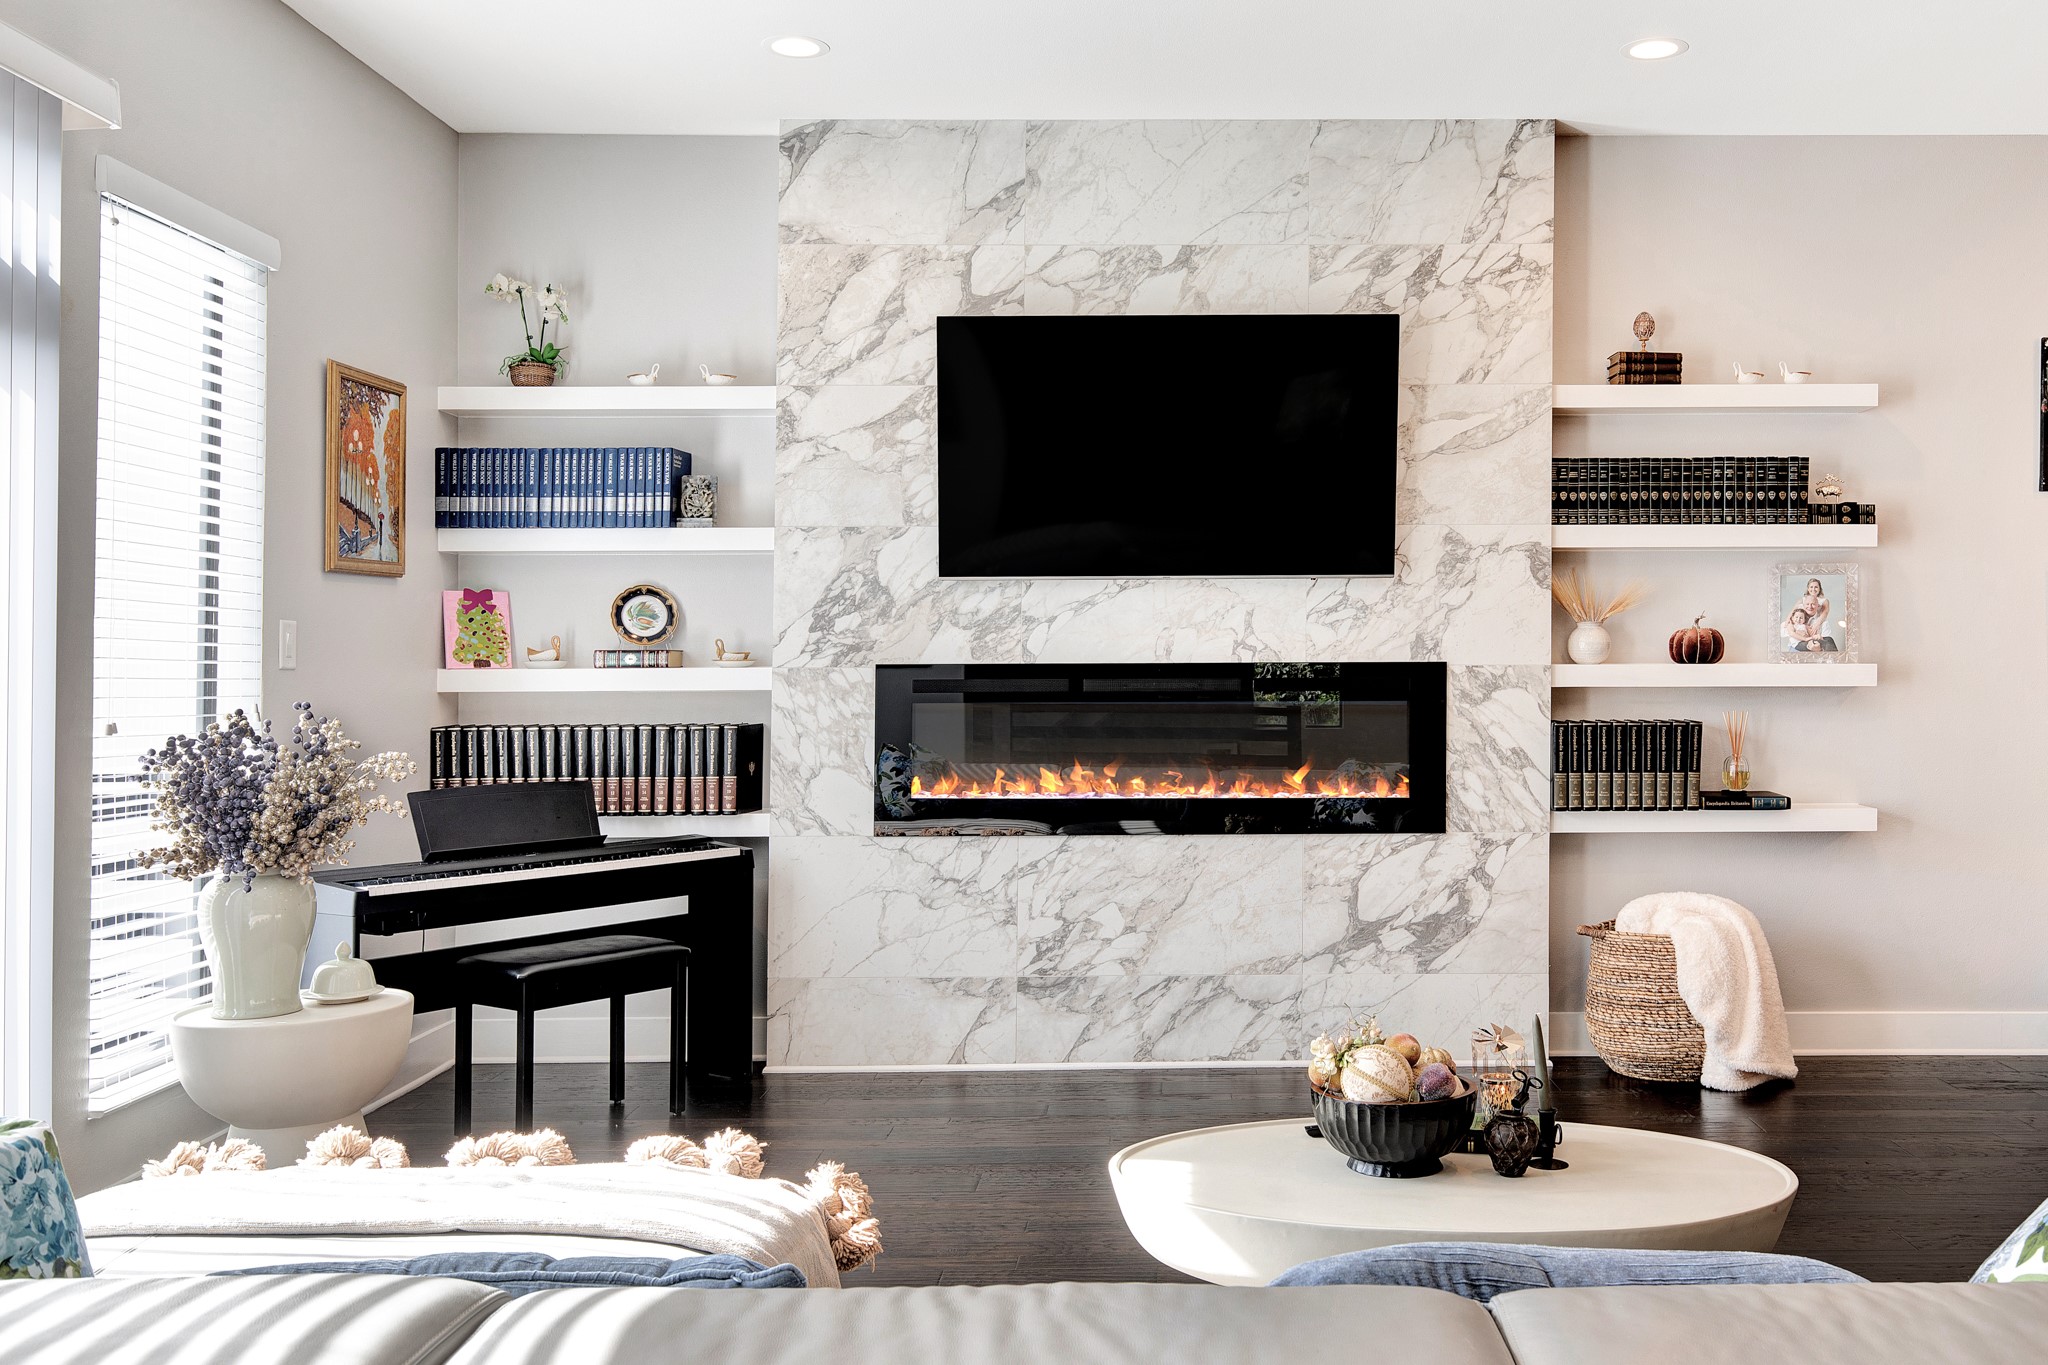 This gorgeous marble fireplace is the focal point of the living room!